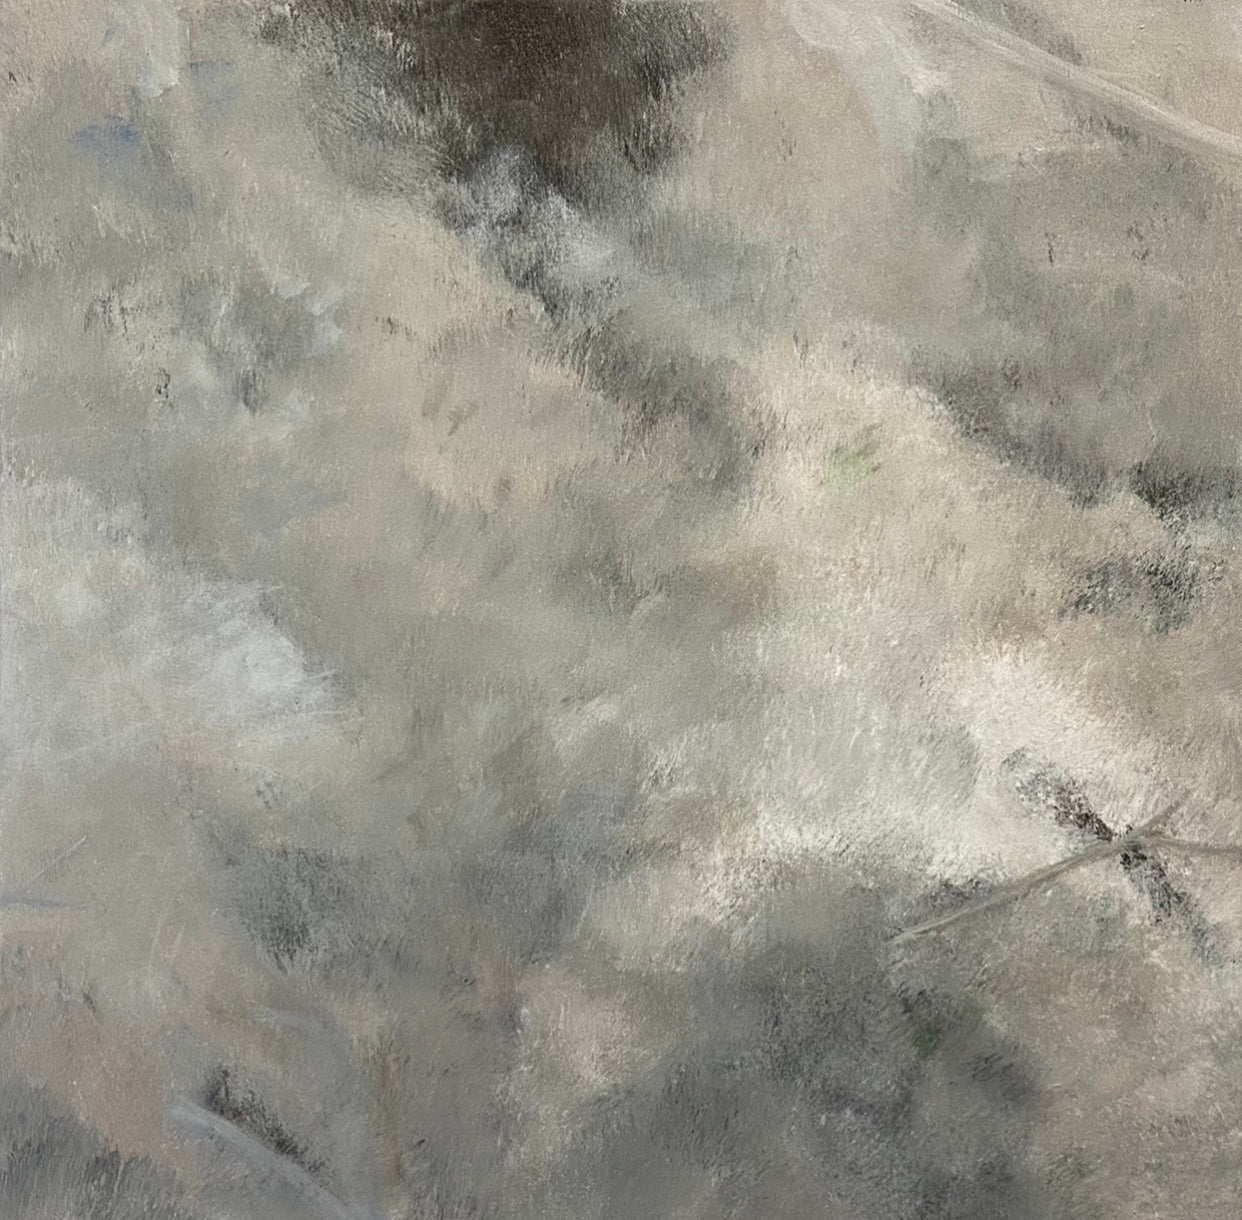 Juanita Bellavance, Some simple dirt, From the Chestatee River portfolio, 2021, Acrylic on canvas, 24 x 24 inches